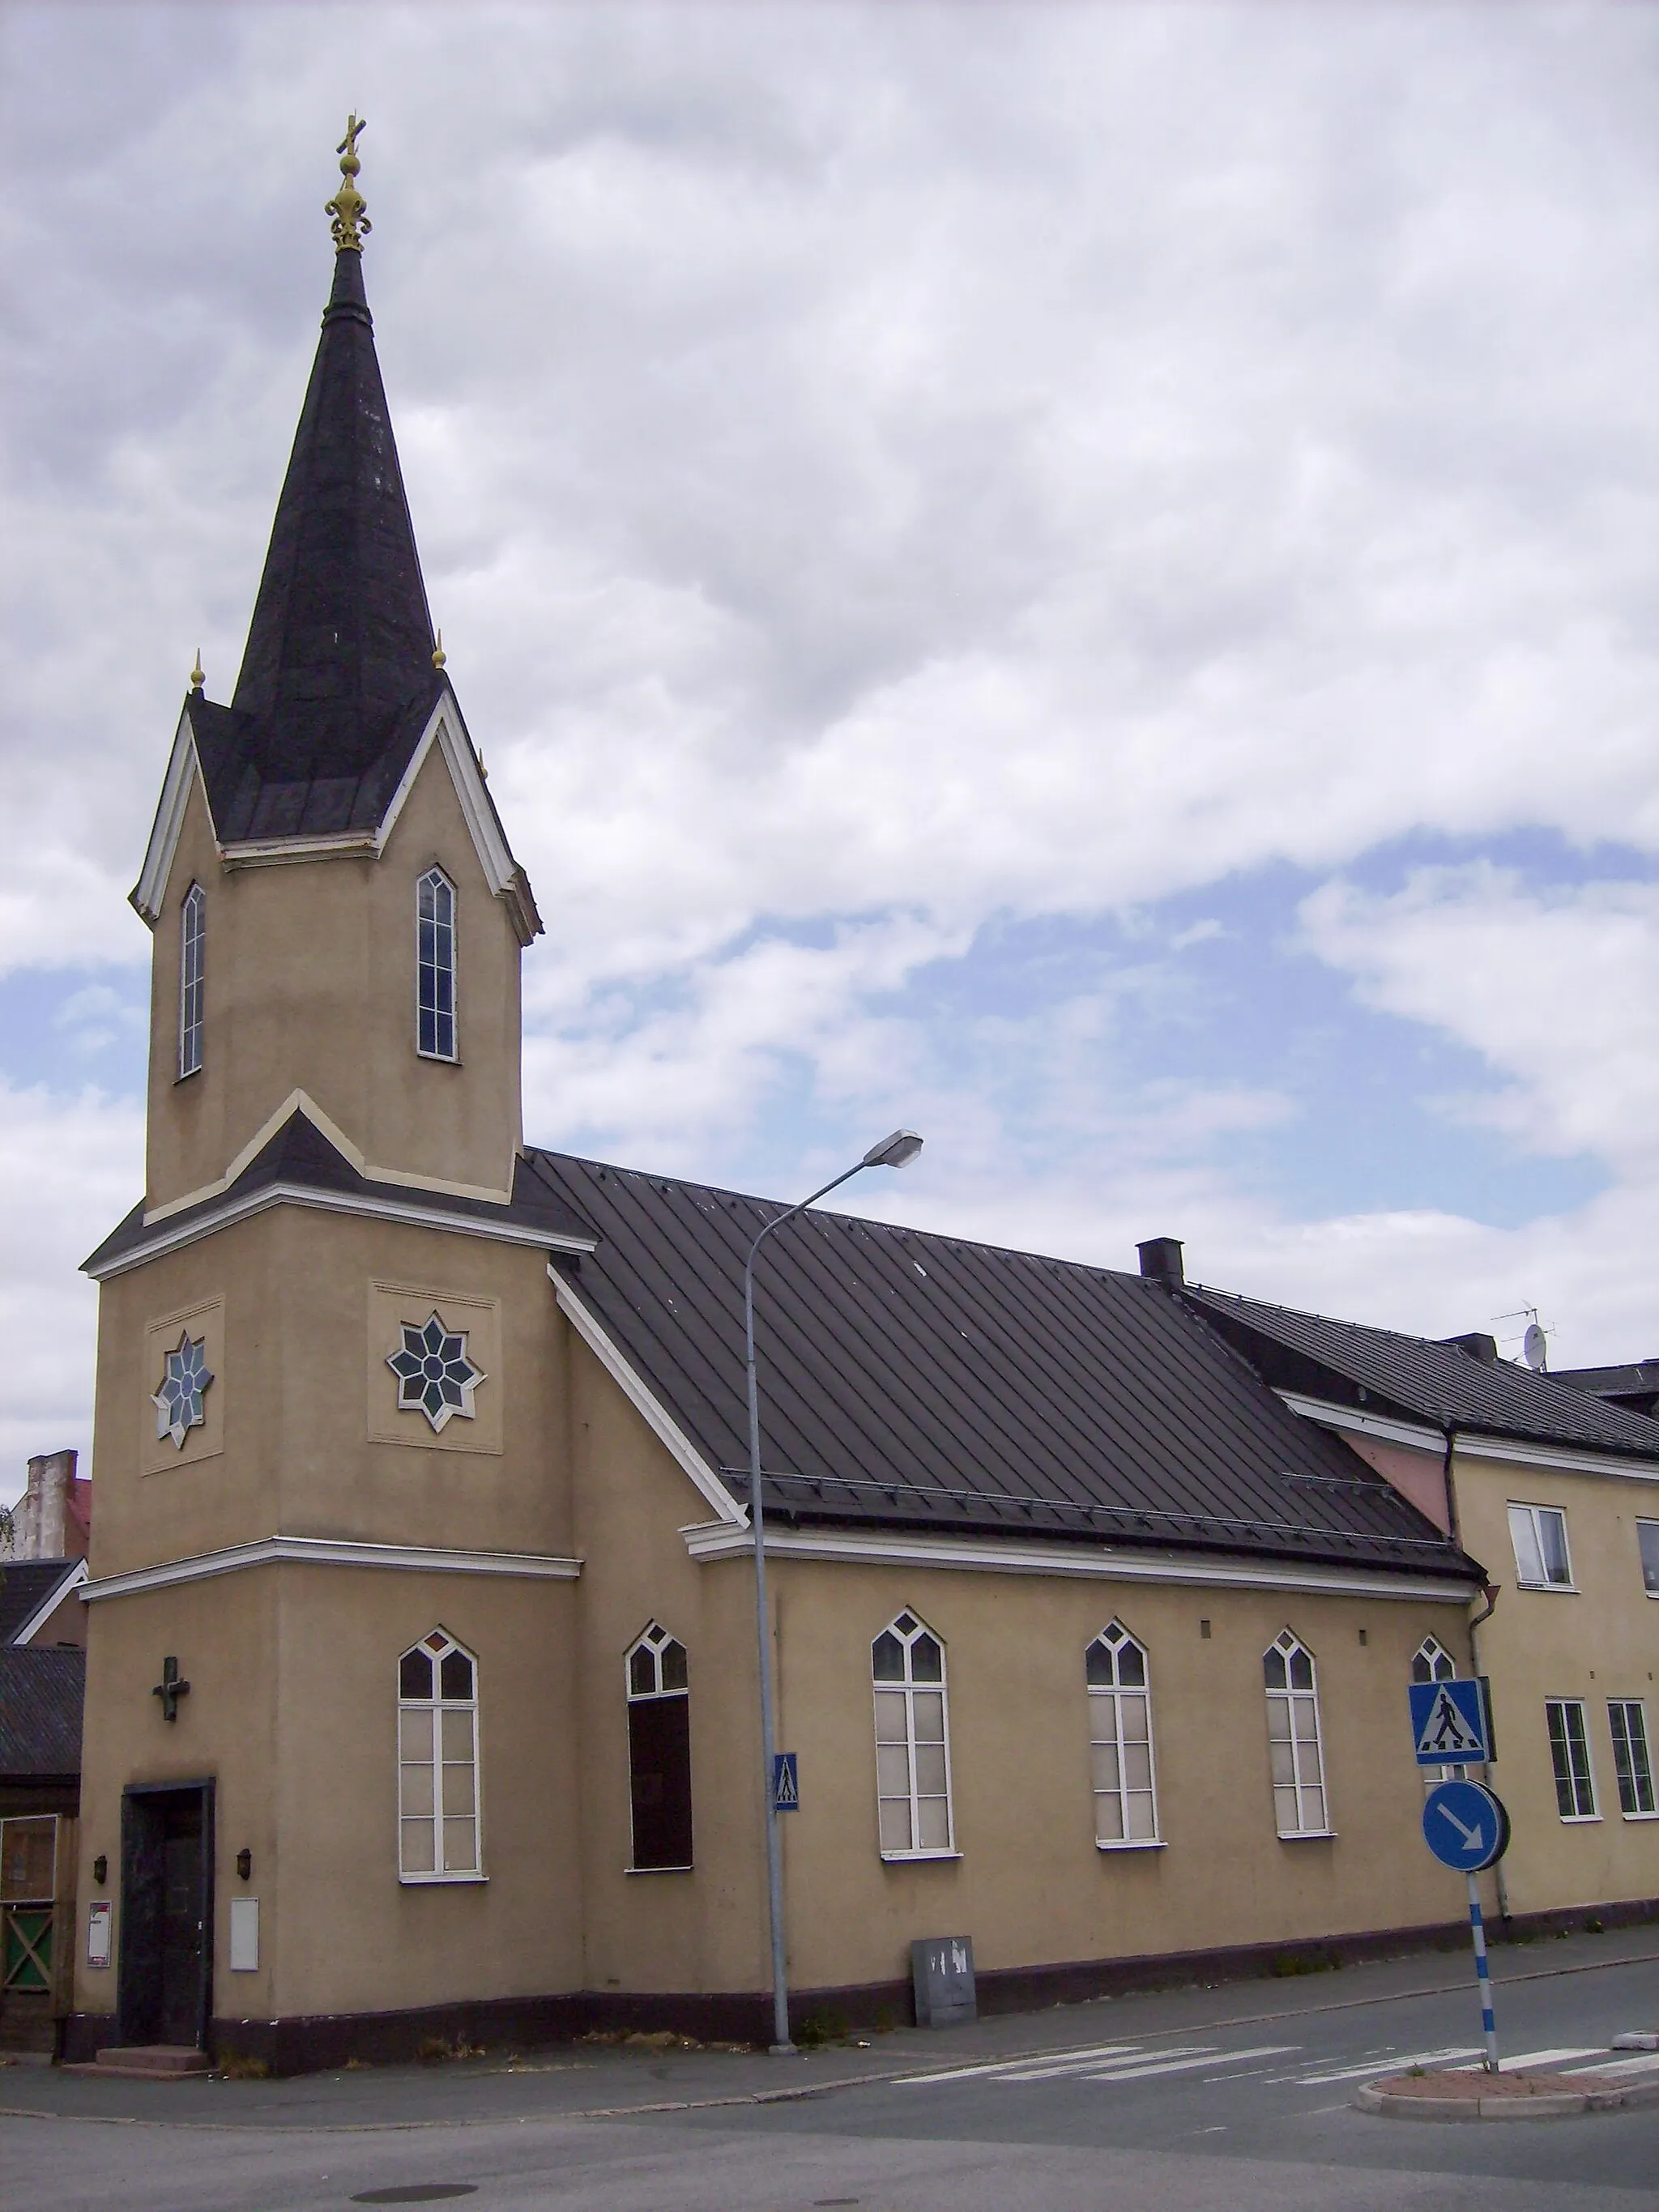 Photo showing: A Free Church in the town Nässjö in Sweden.